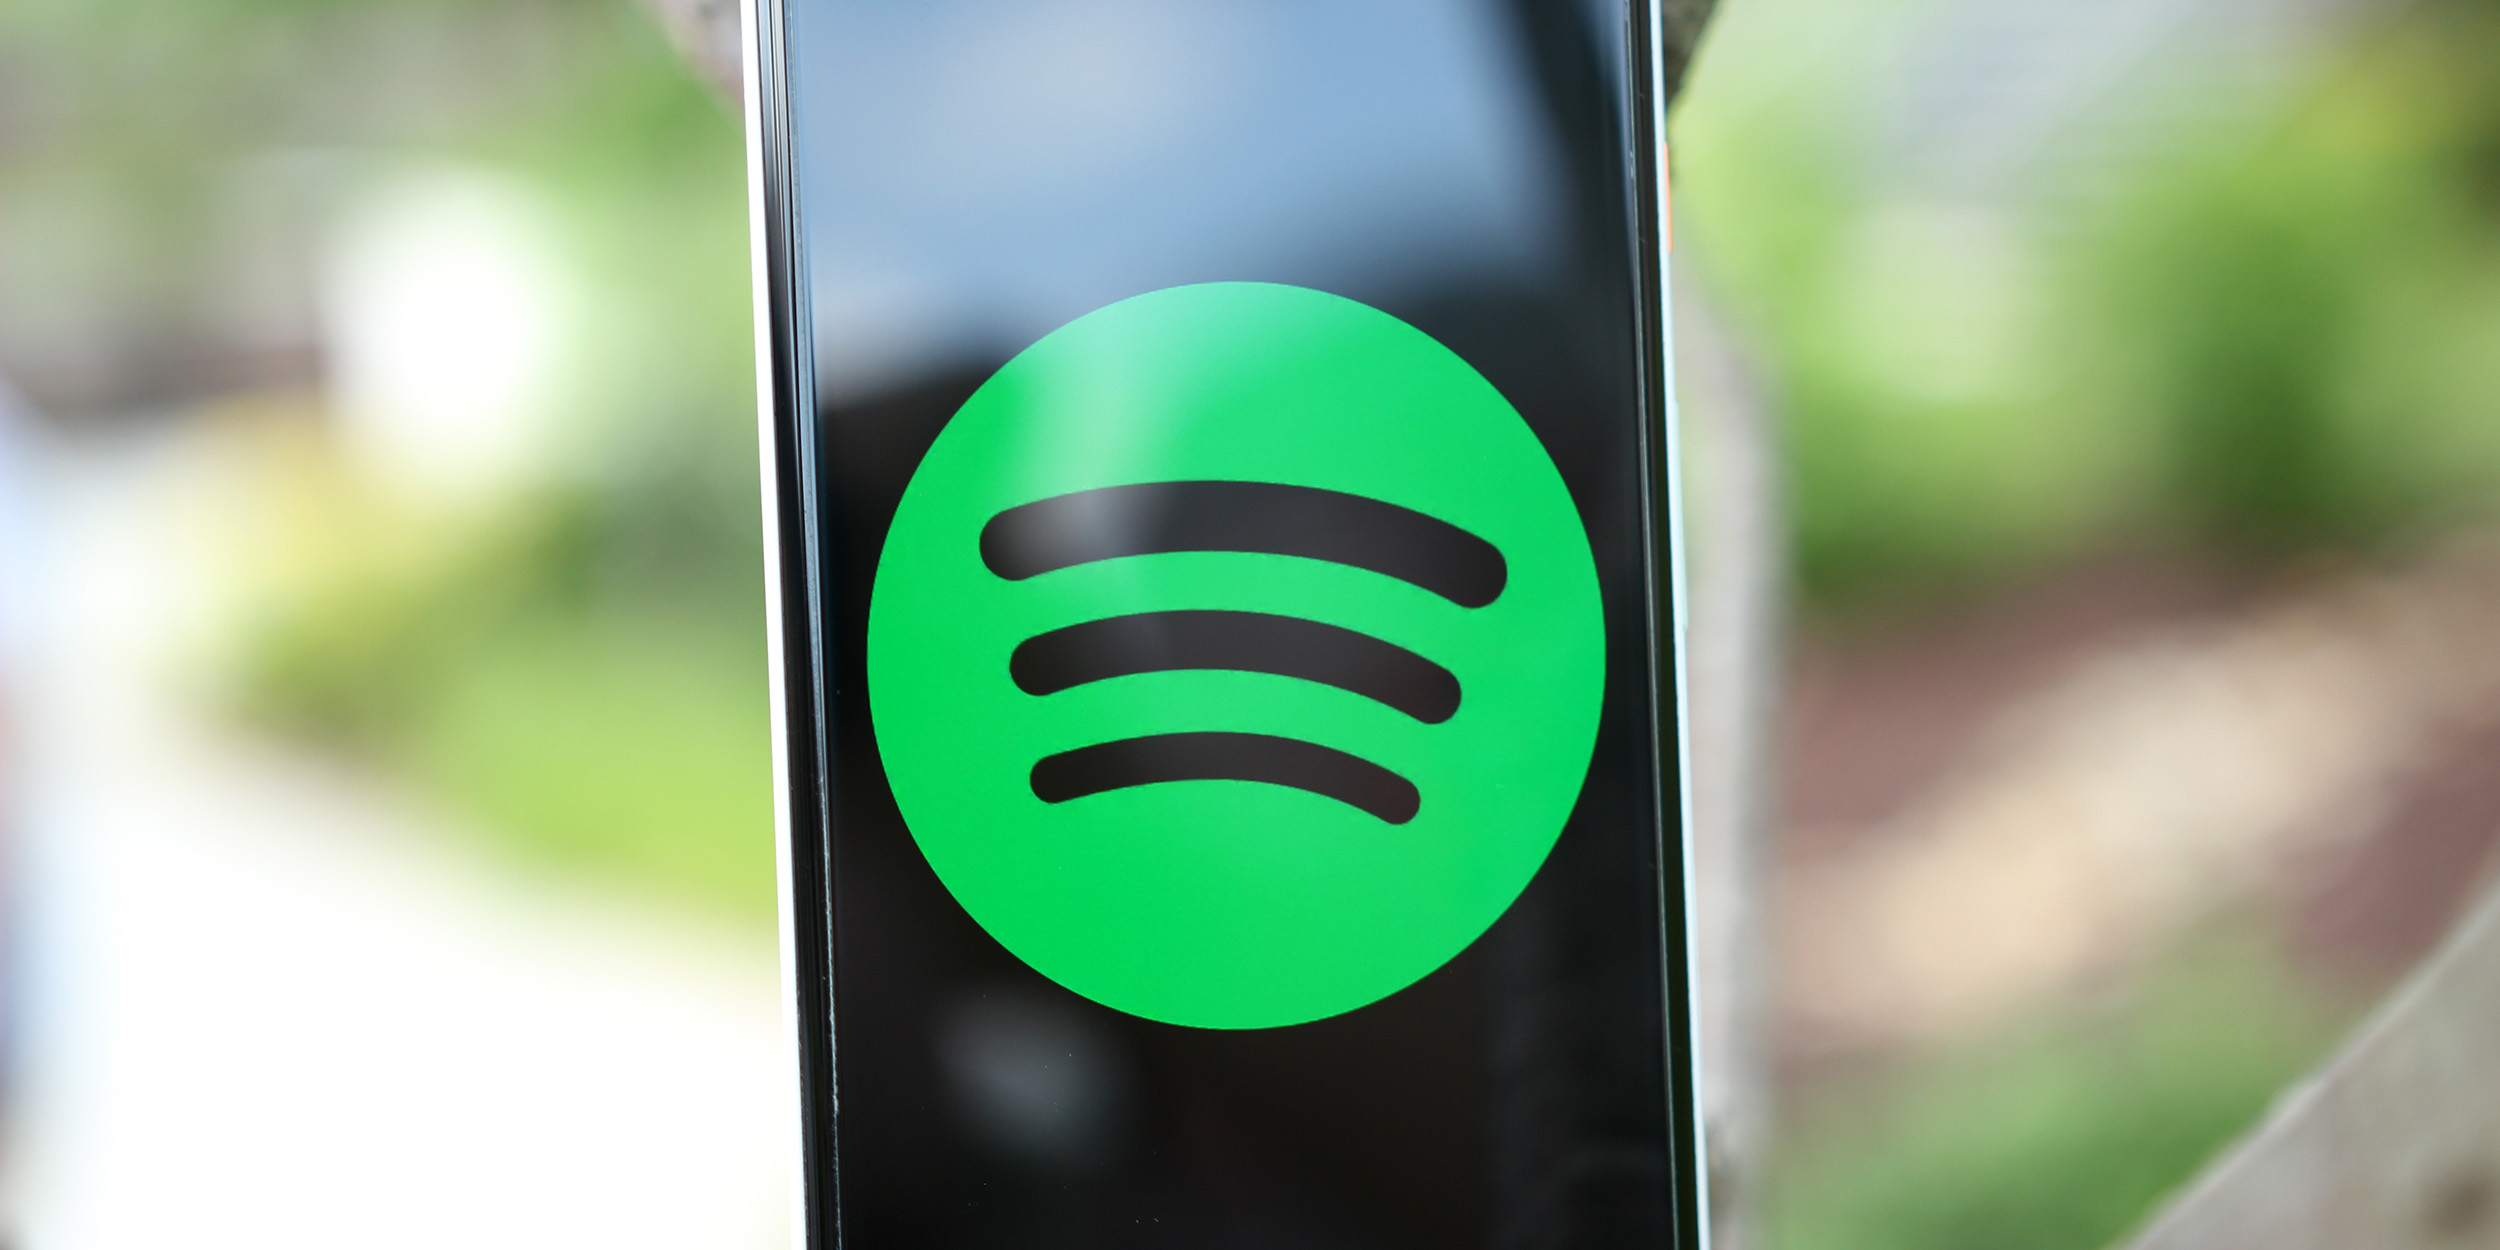 download the new version for android Spotify 1.2.16.947